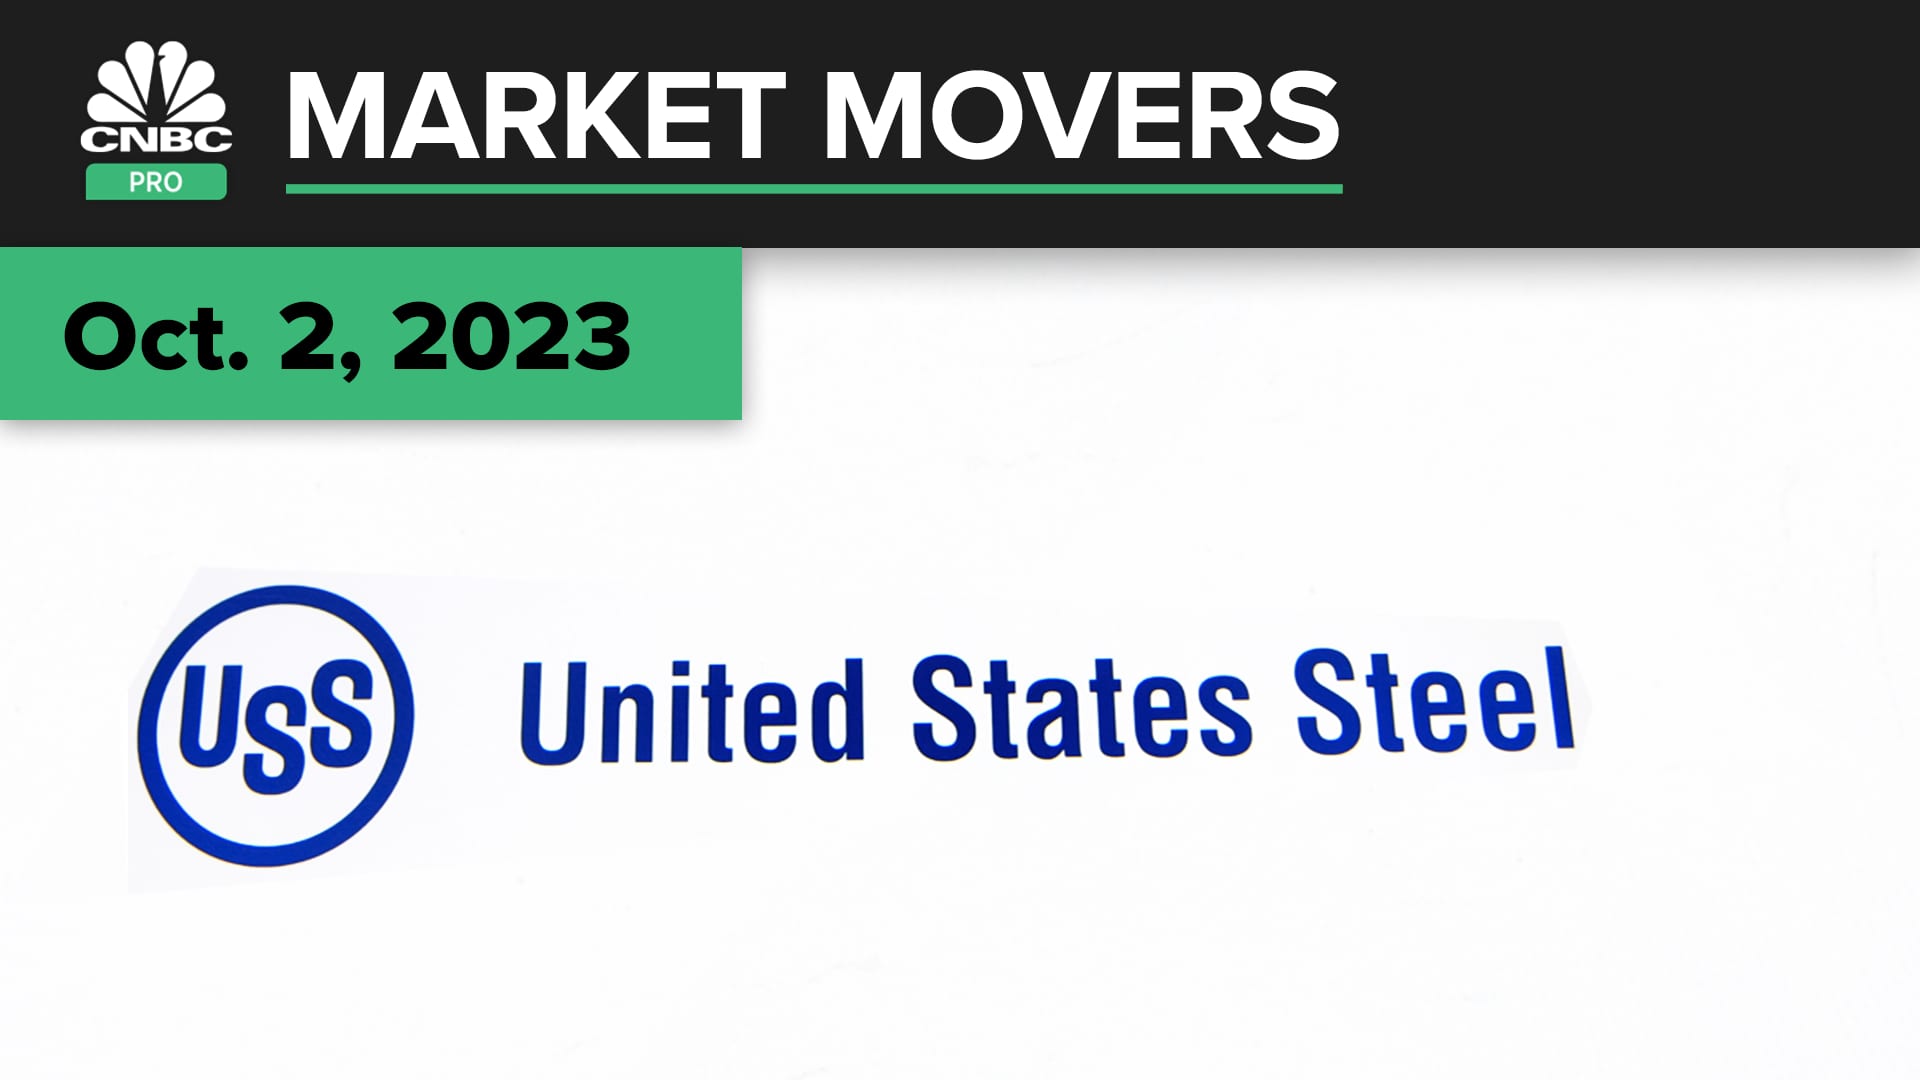 Morgan Stanley upgrades U.S. Steel to overweight. Here’s what the pros say